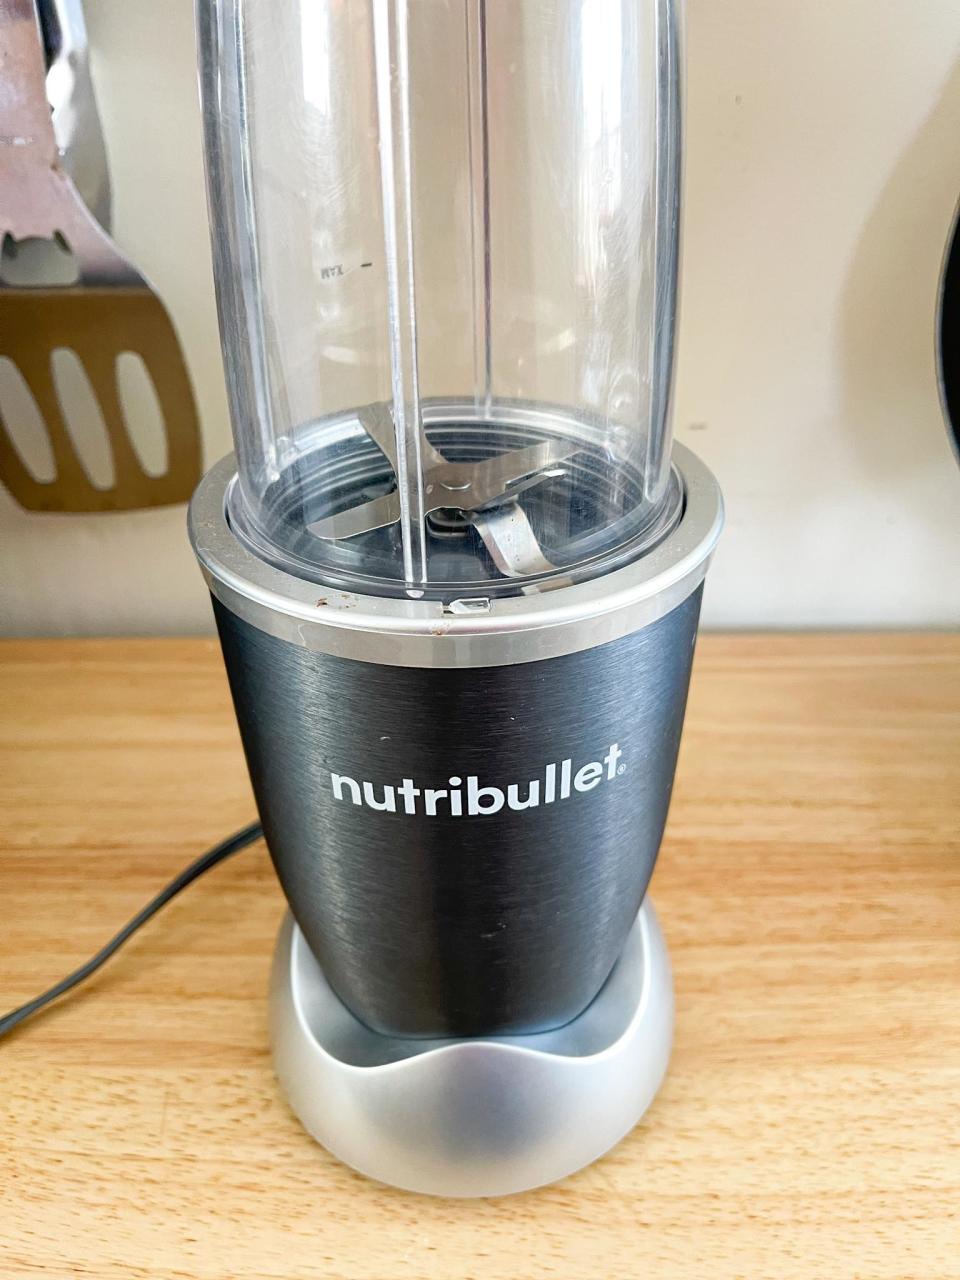 Nutribullet on a counter